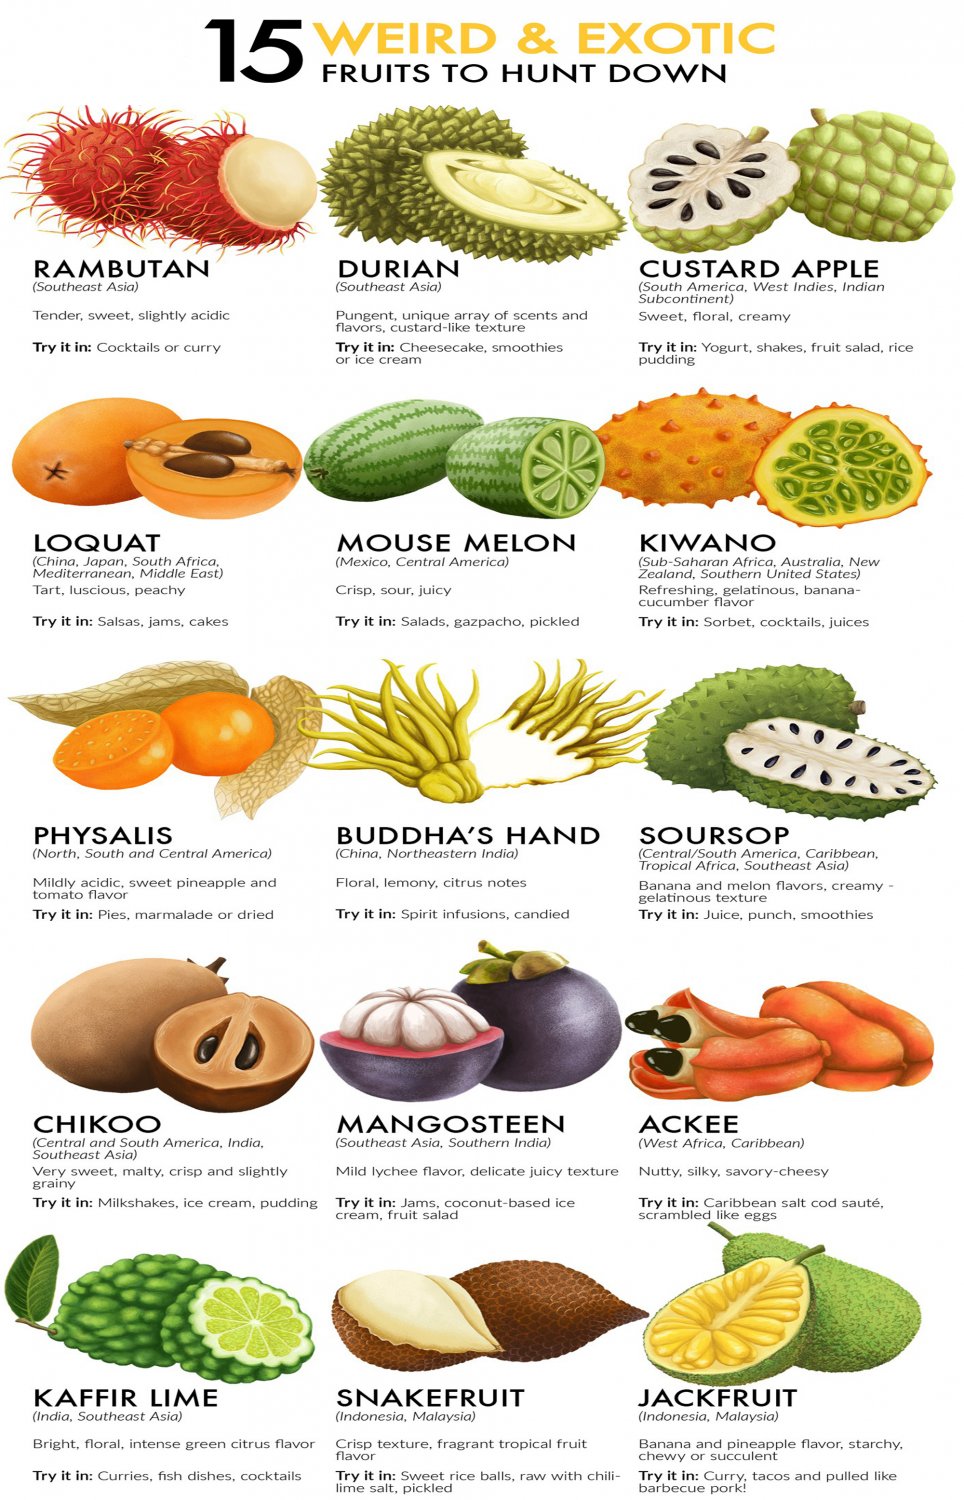 15 weird and exotic fruits to hunt down Chart 13"x19" (32cm/49cm) Polyester Fabric Poster